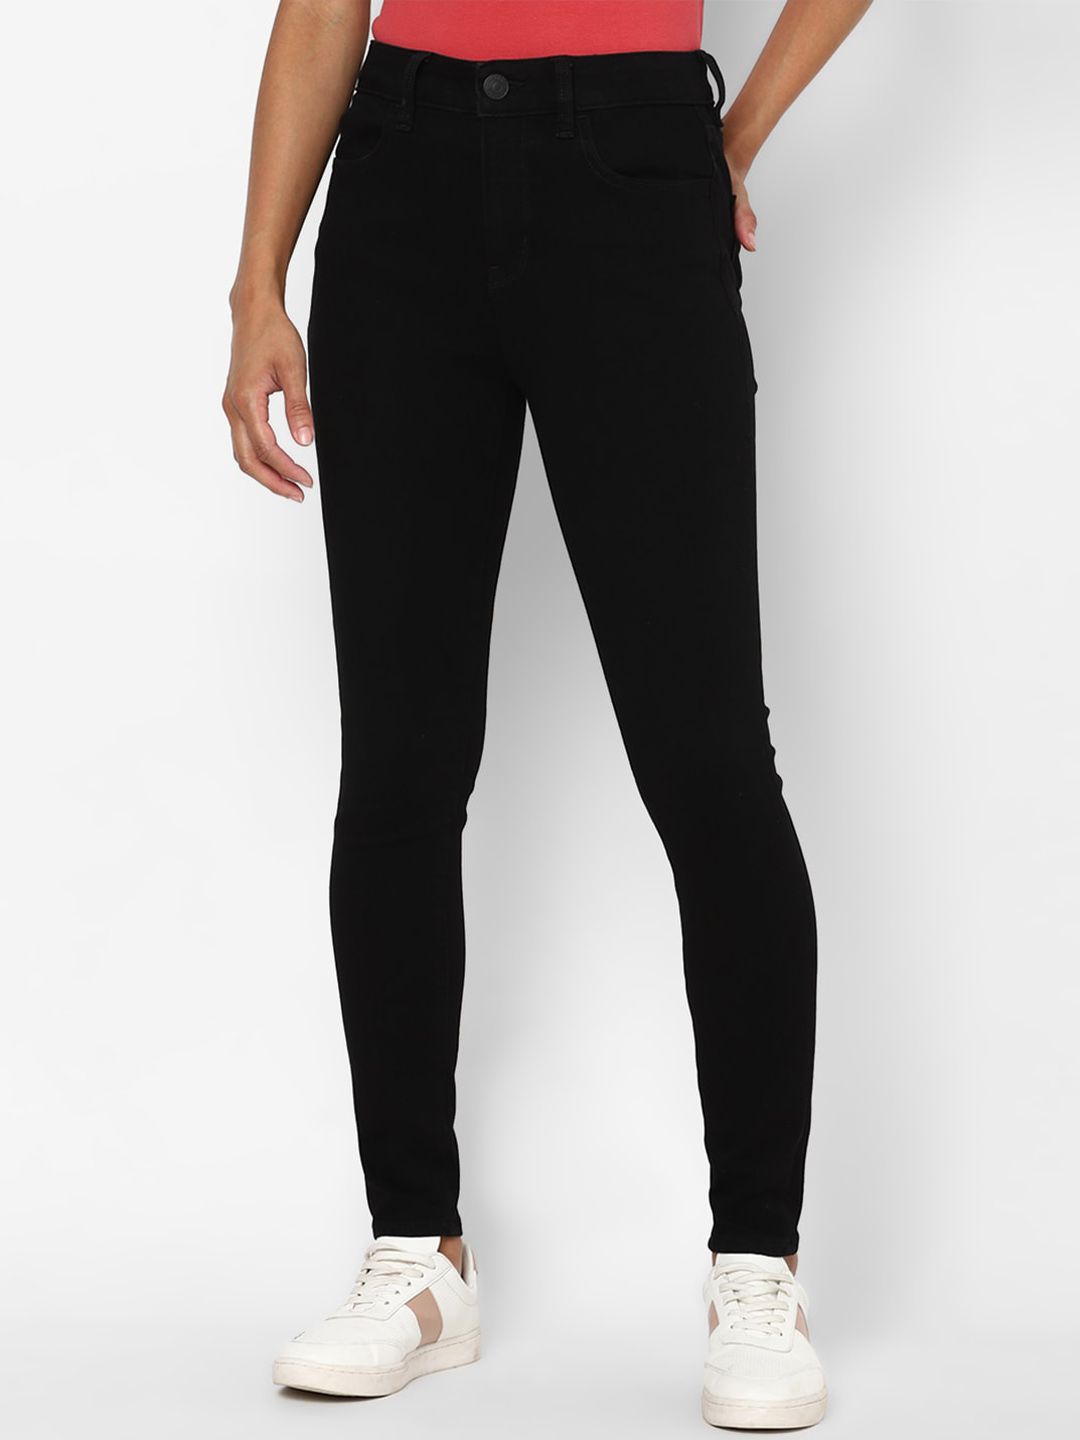 AMERICAN EAGLE OUTFITTERS Women Black Slim Fit High-Rise Jeans Price in India